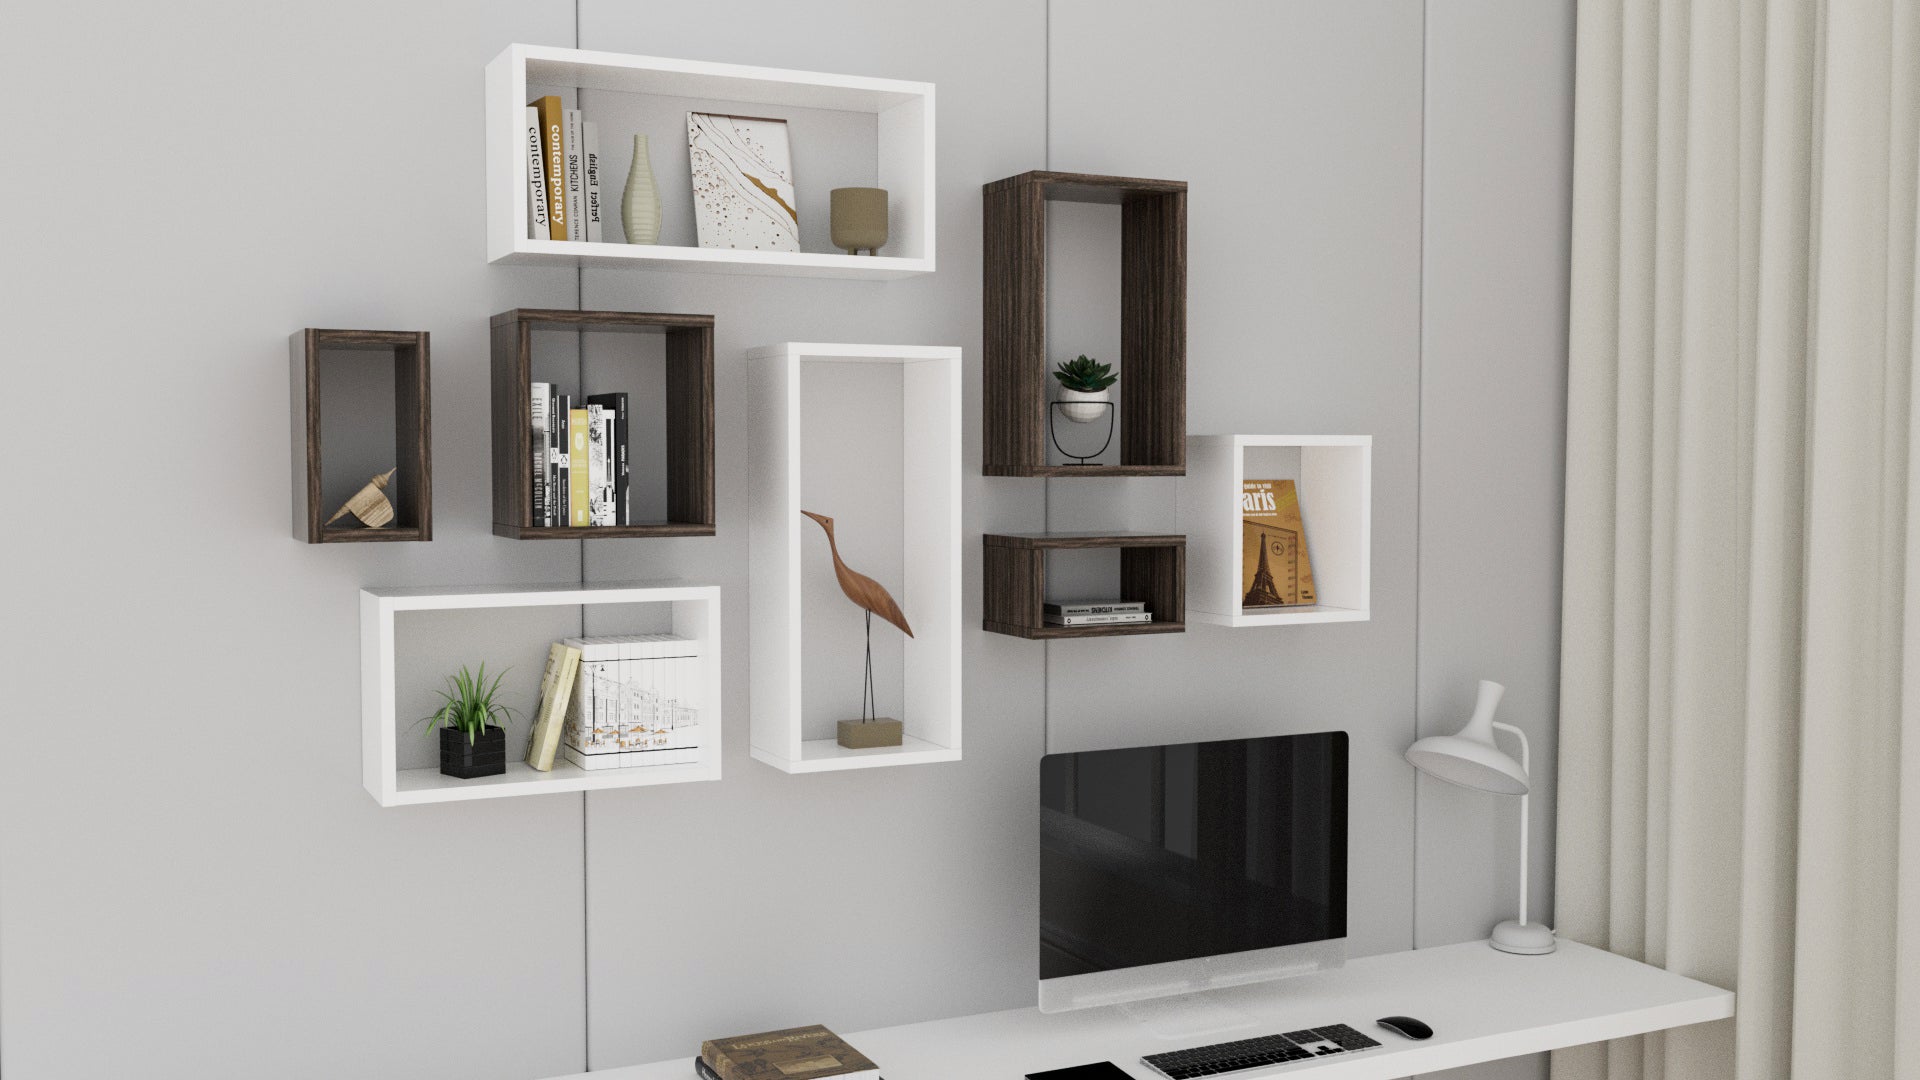 How to Install Kaboon Floating Cube Shelves